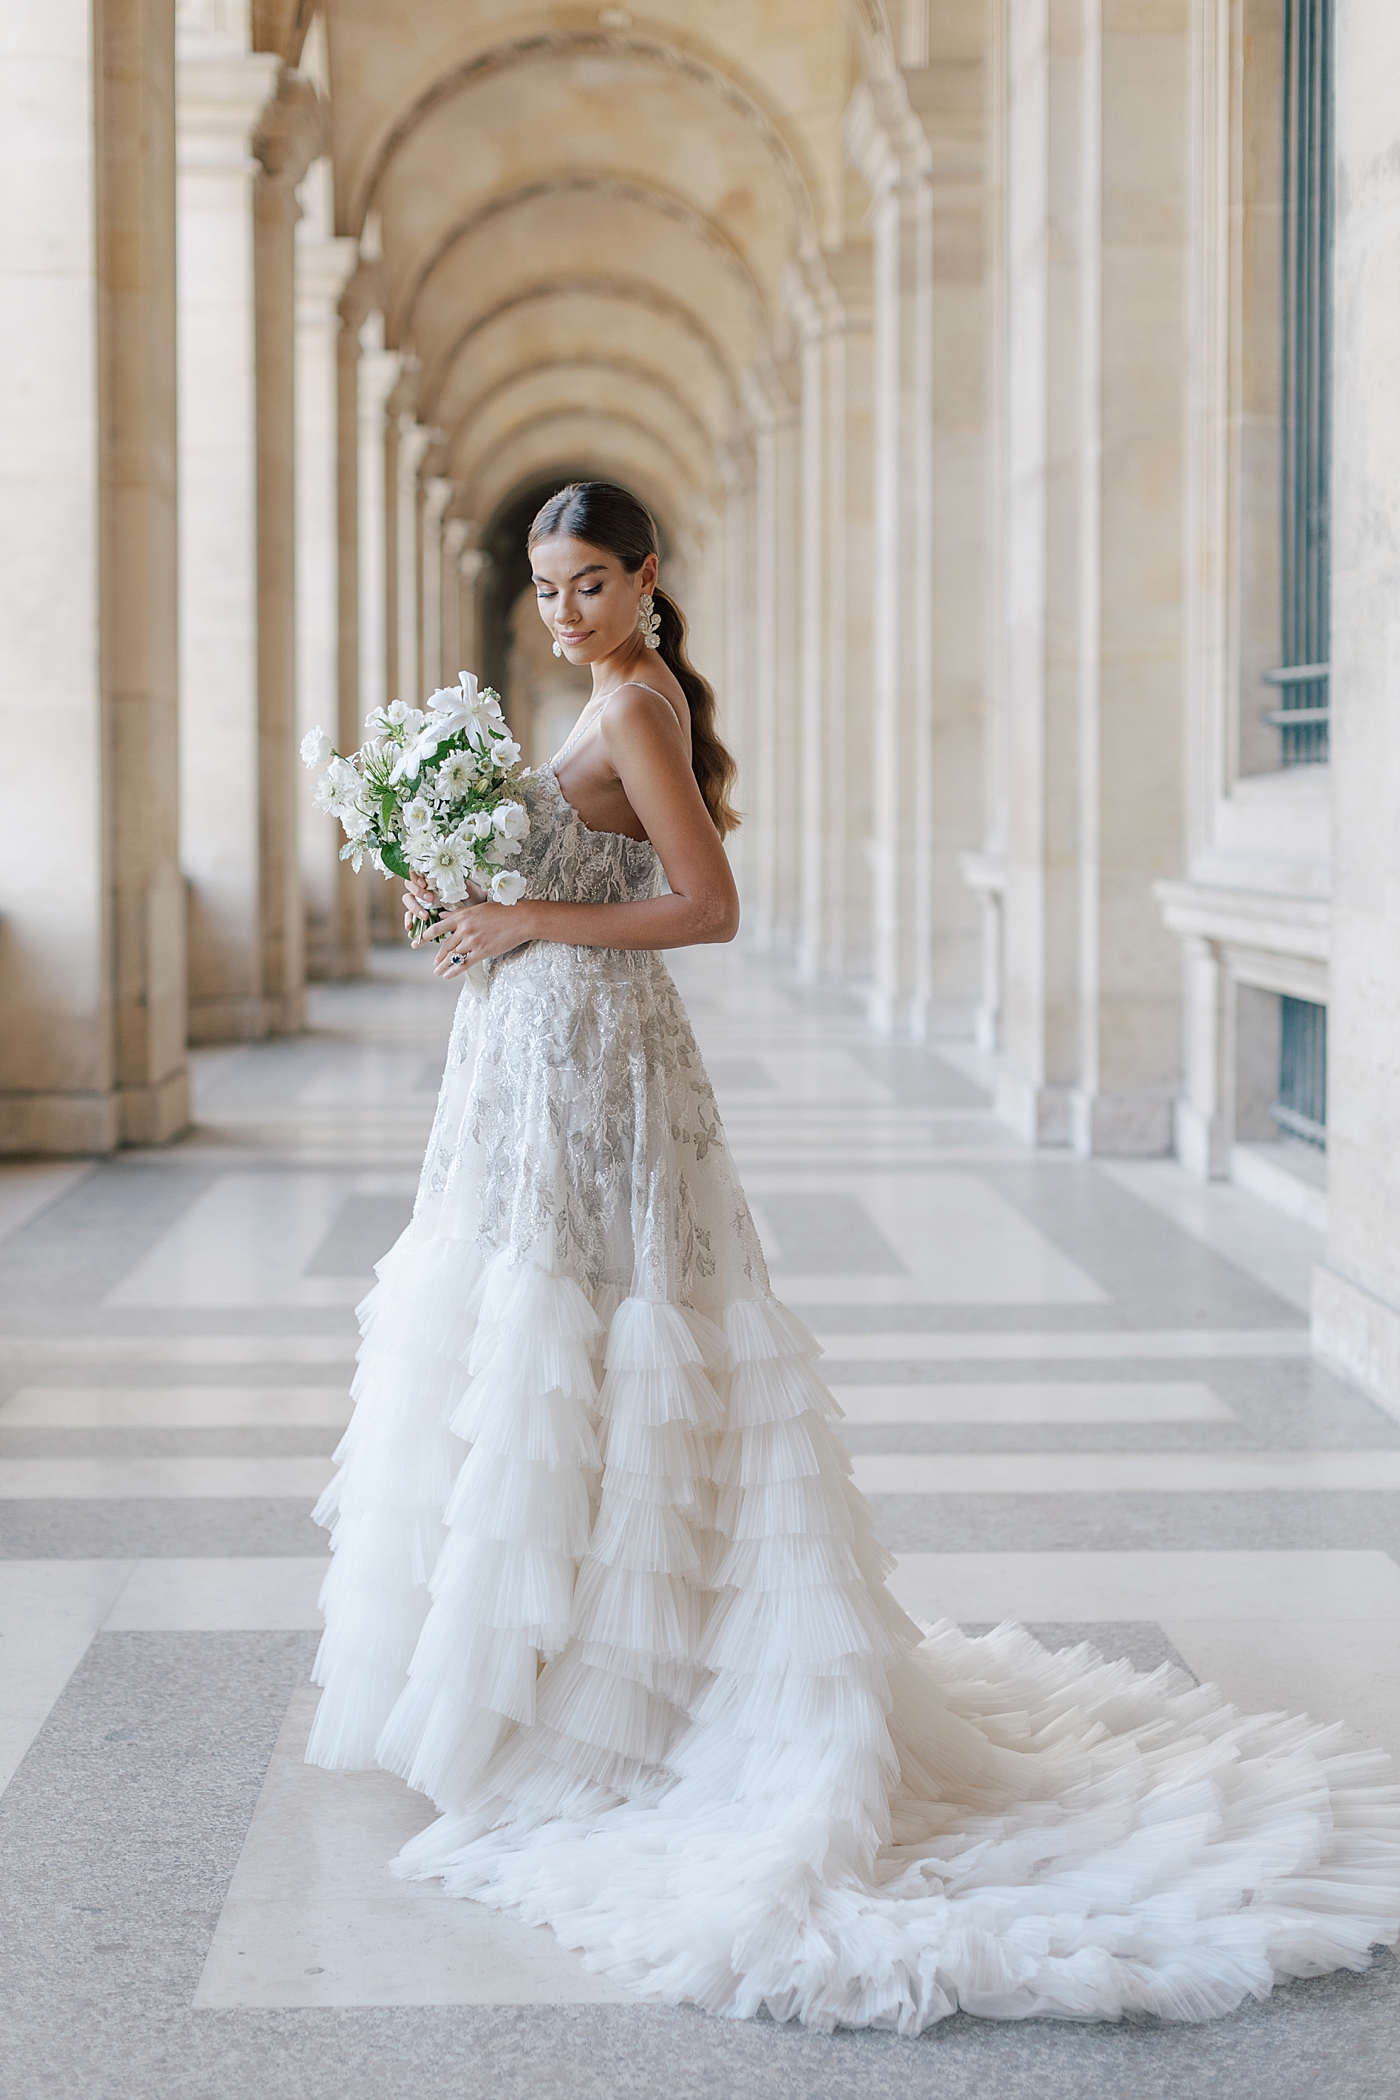 Bride standing in the outside hallway of the Louvre with a bouquet looking down over her shoulder | Image by Hope Helmuth Photography